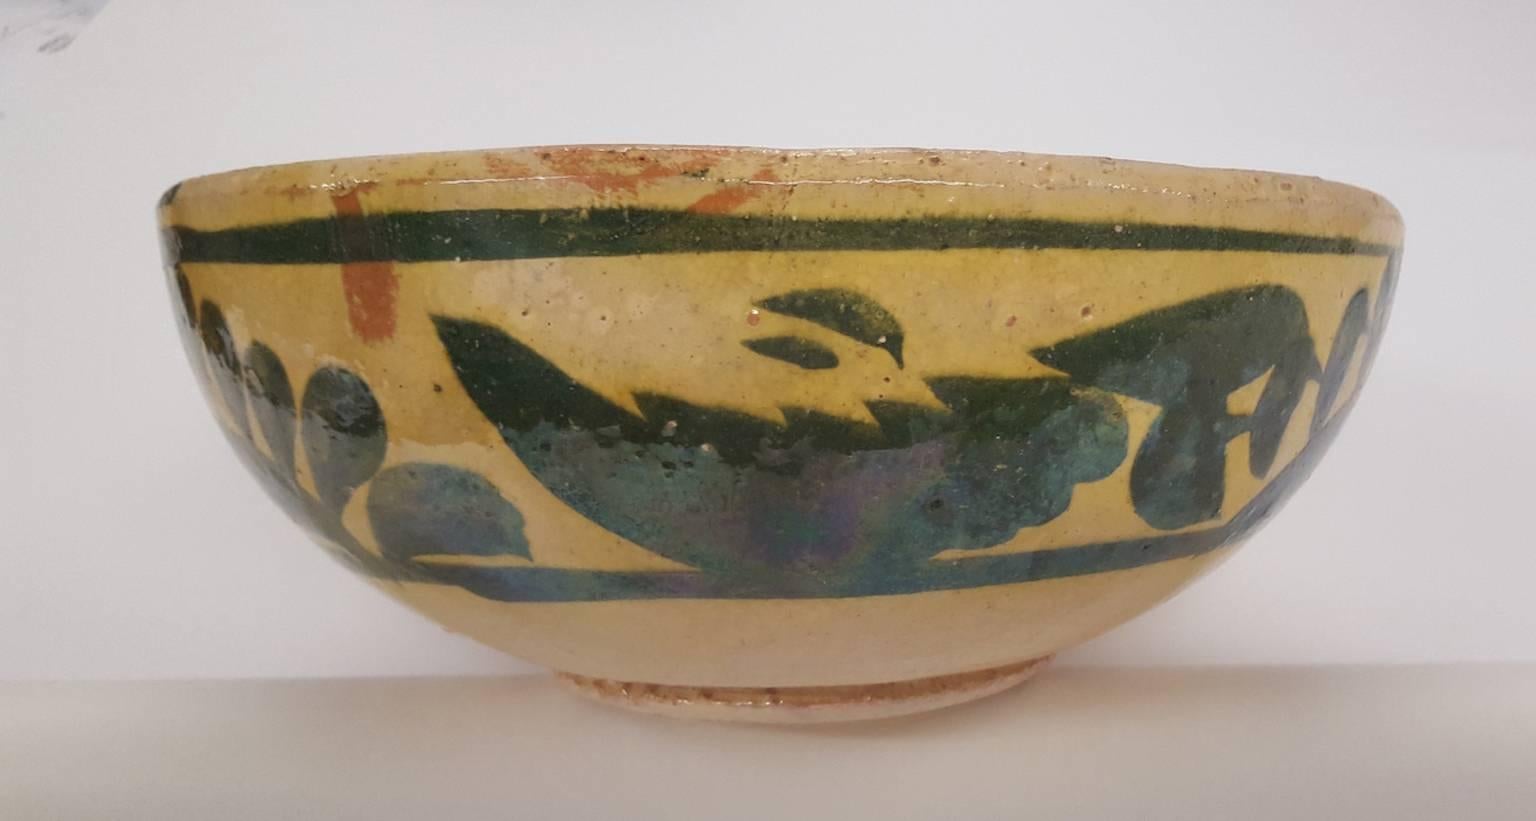 Two small, vintage, Mexican pottery bowls, with same colors (yellow and green) but with different decorative patterns around the exterior. Likely produced in the 1930s or 1940s, these bowls are charming in appearance and most likely to be used as